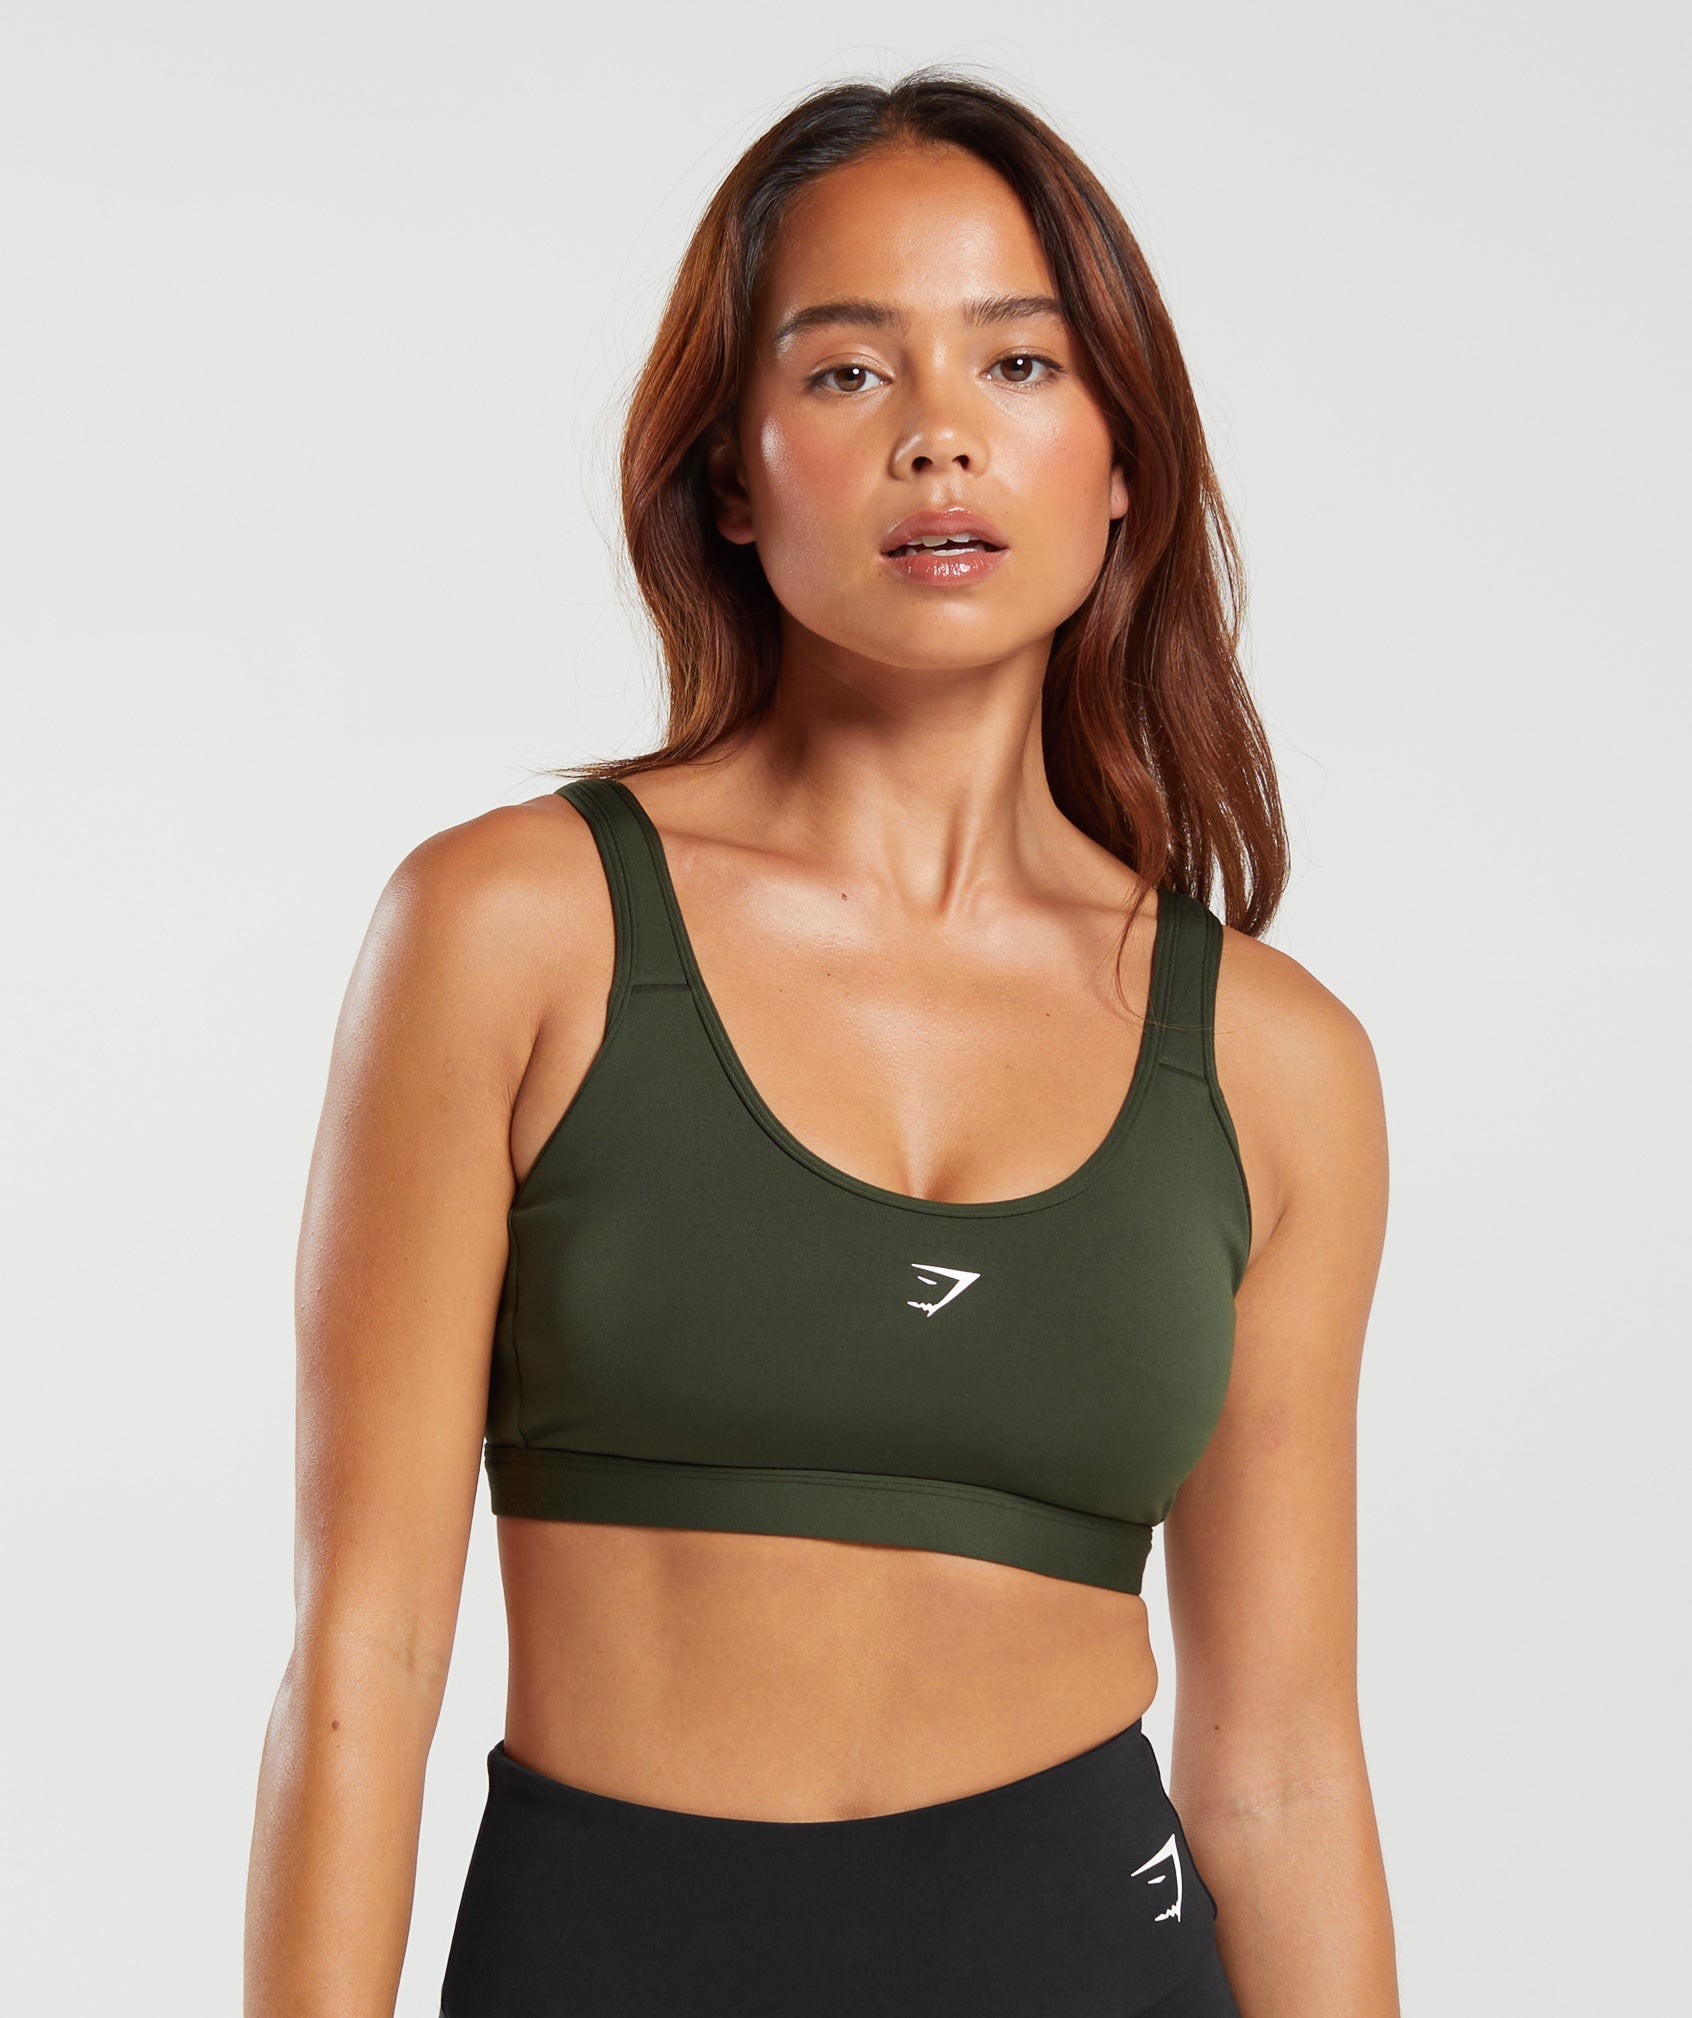 Fraction Sports Bra product image 1